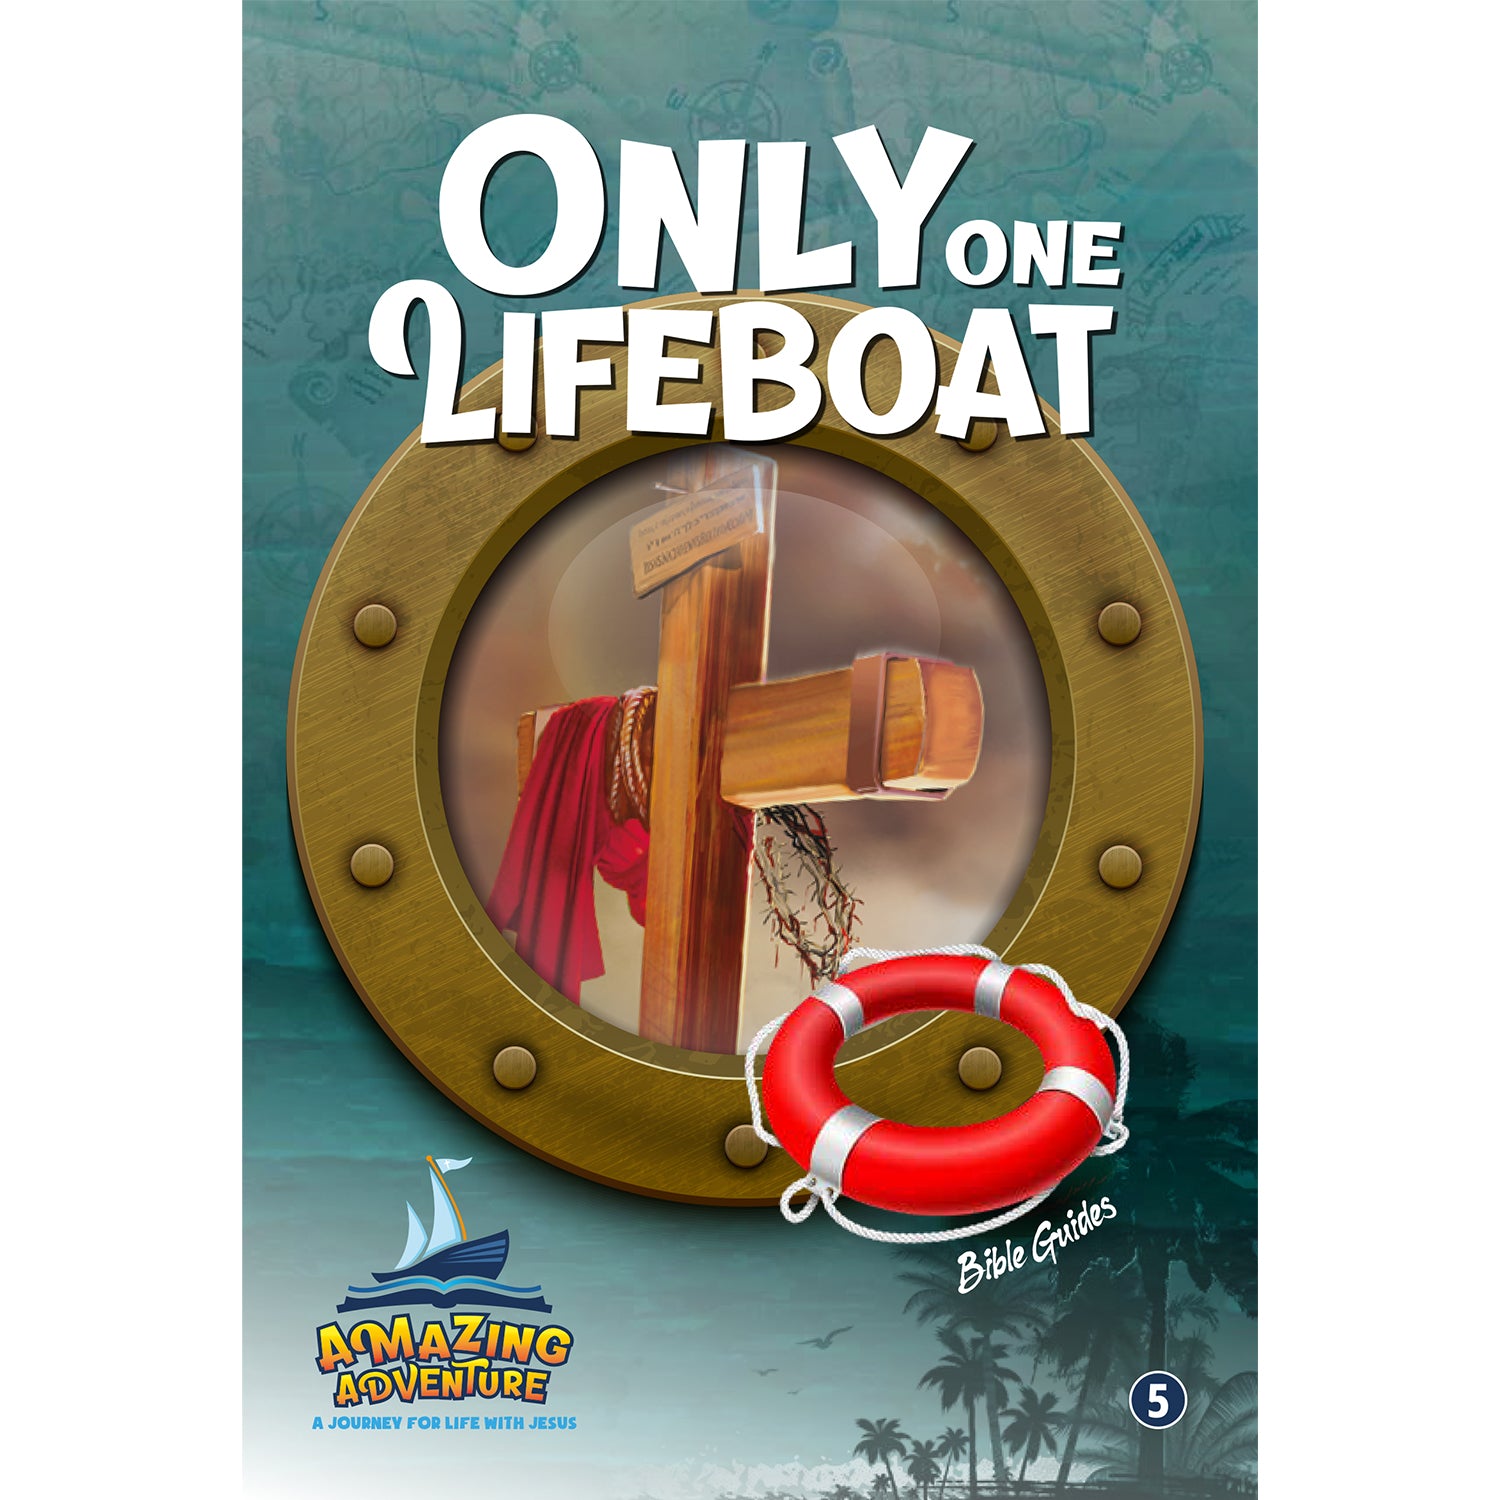 Amazing Adventure - The Only Lifeboat by Doug Batchelor